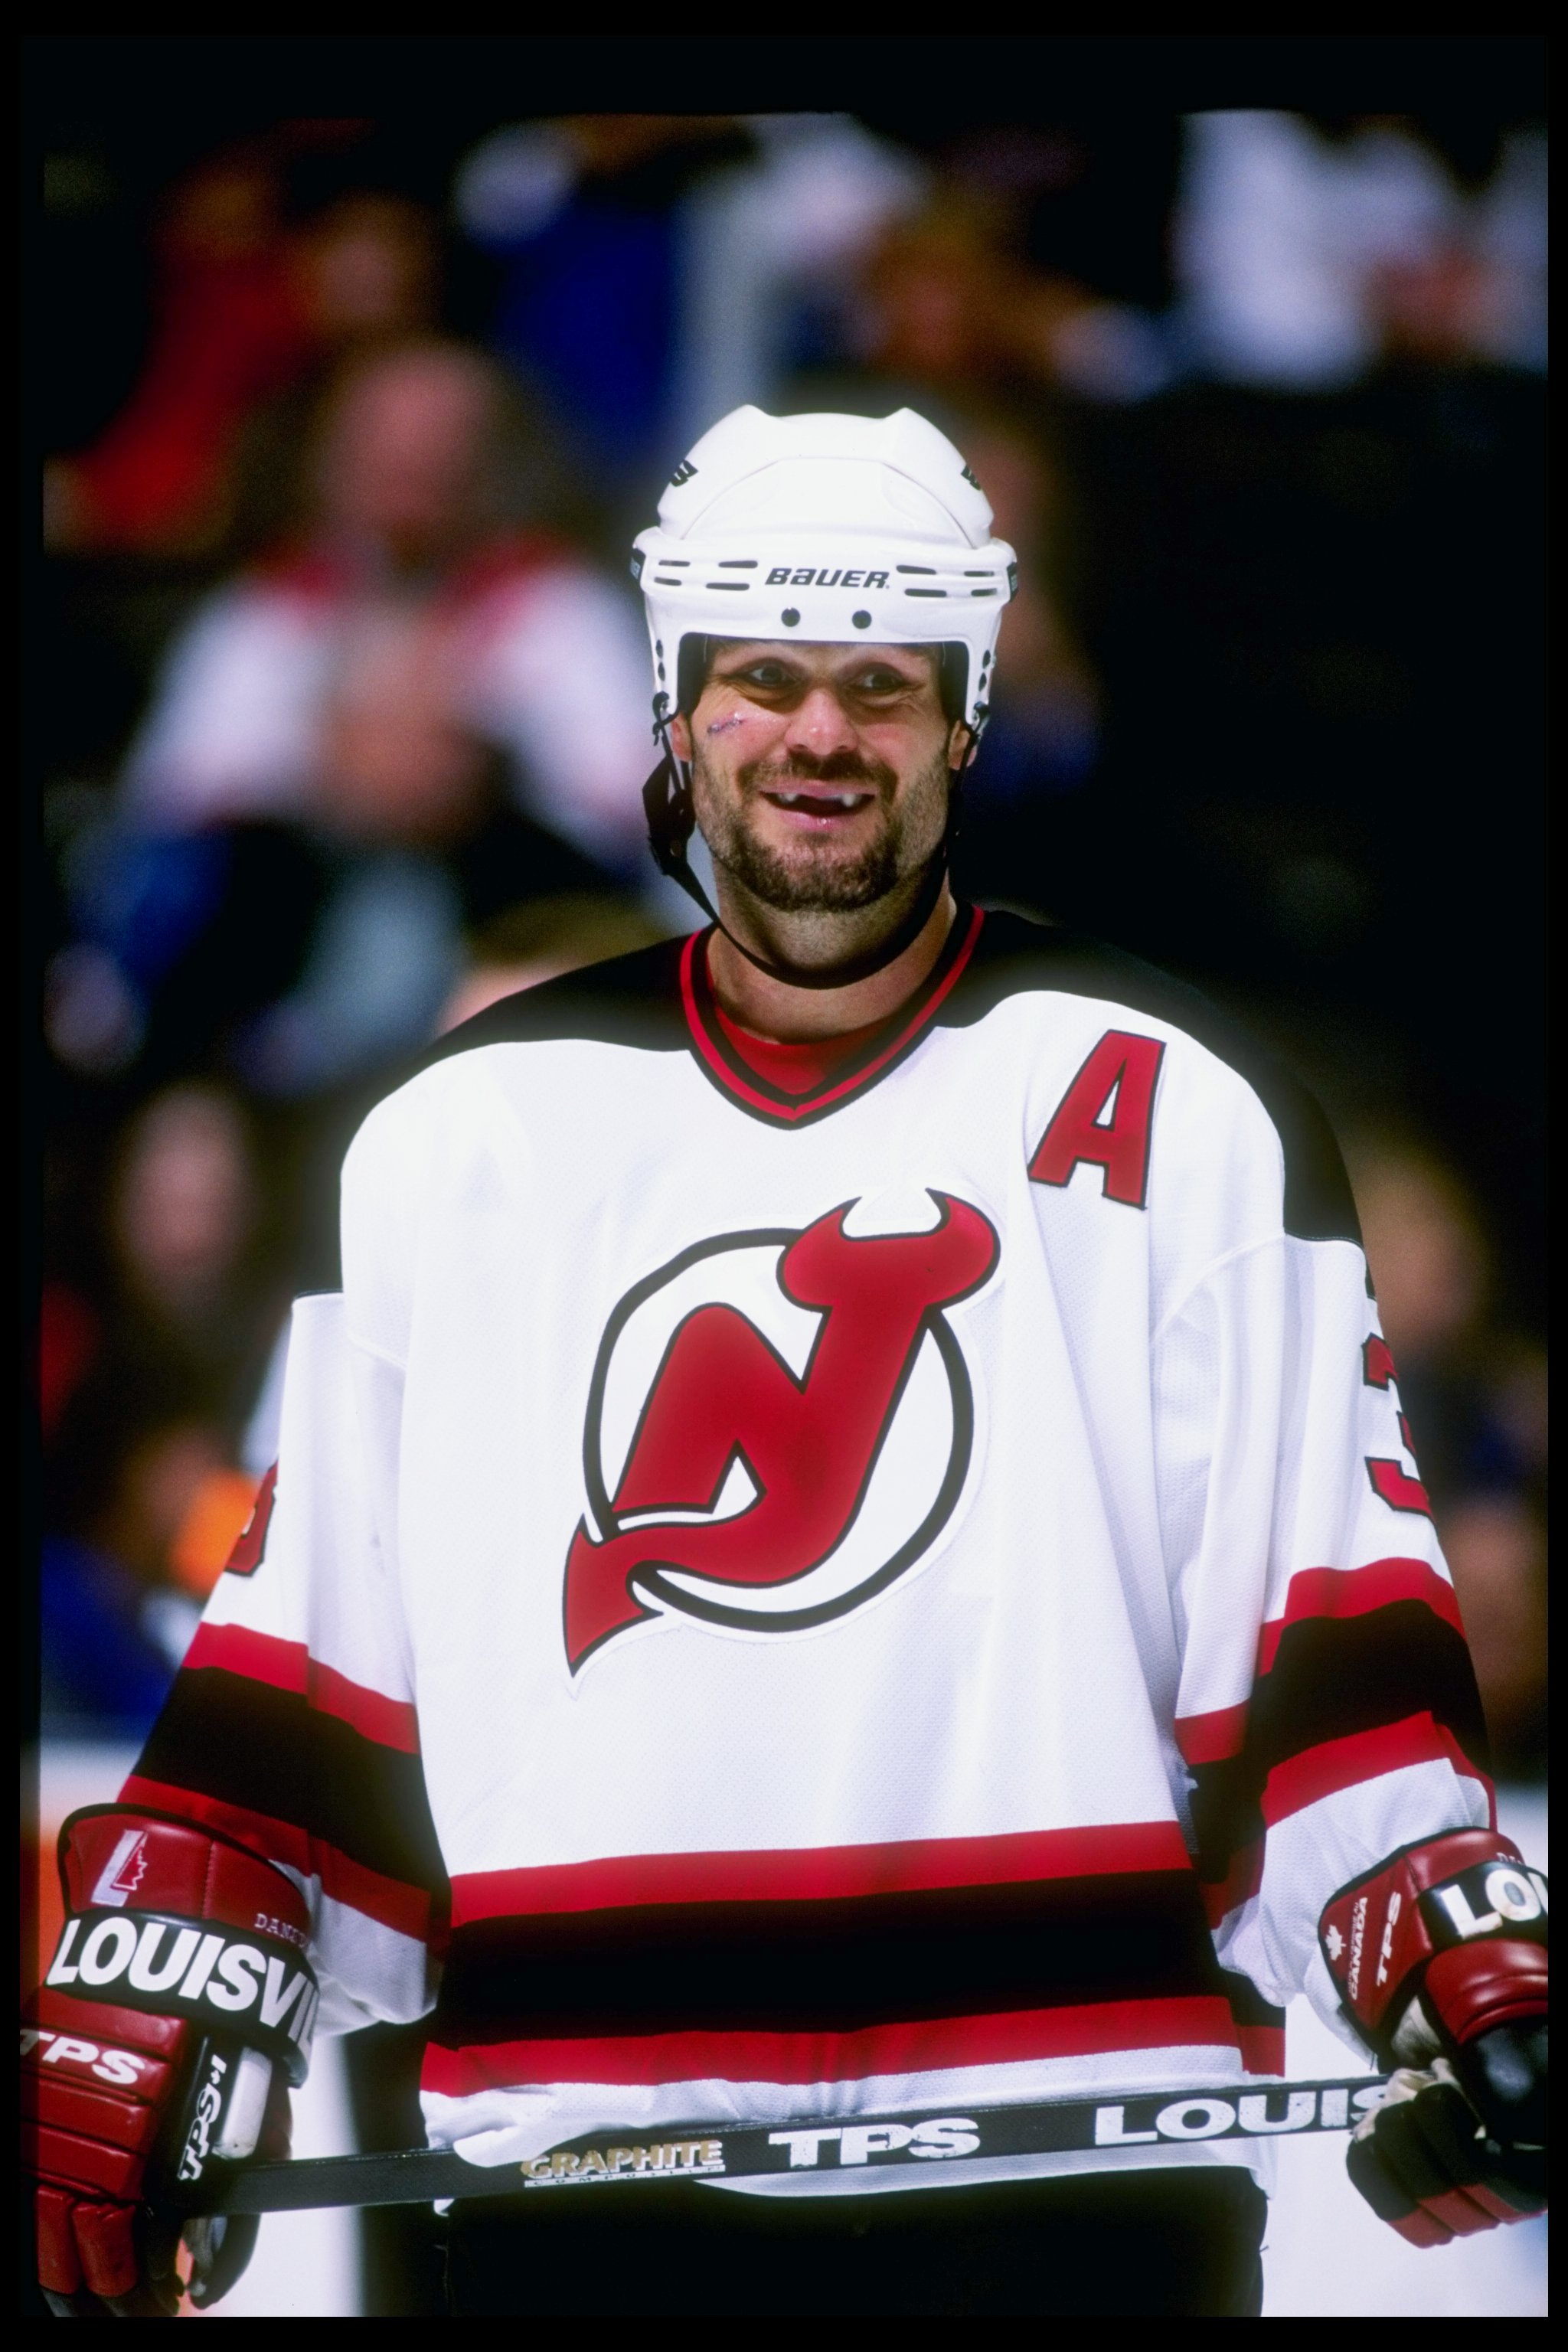 1995 New Jersey Devils: Their Dominant Path to the Stanley Cup